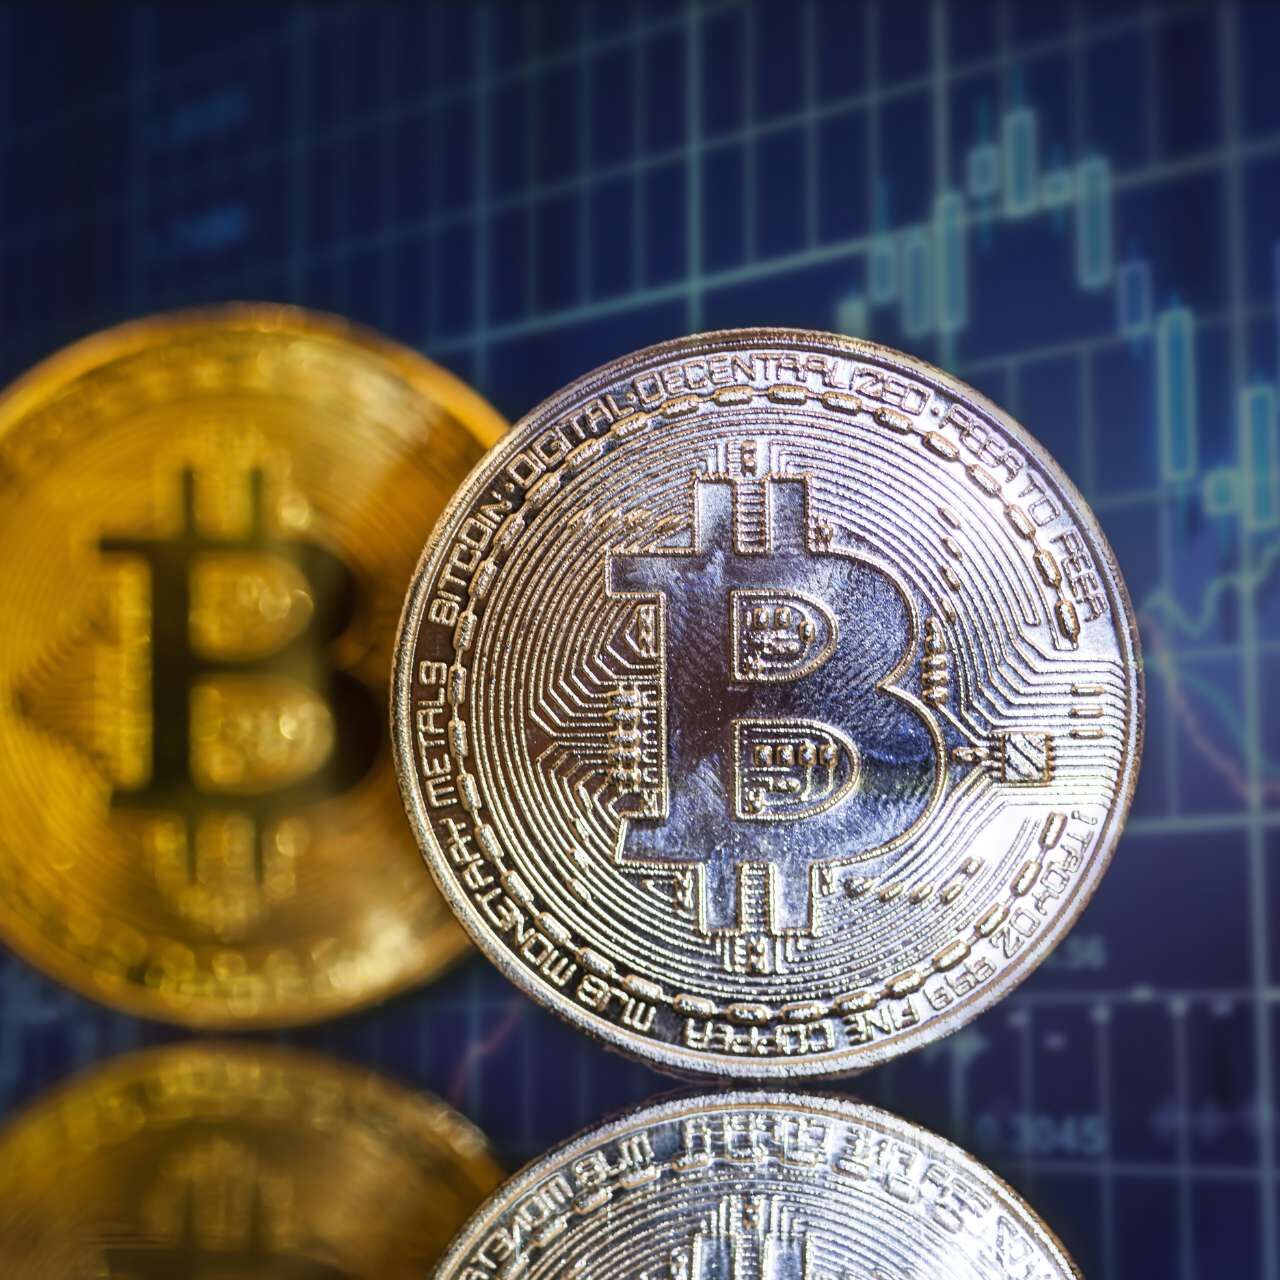 The Golden Bitcoin cryptocurrency, a new concept of virtual money